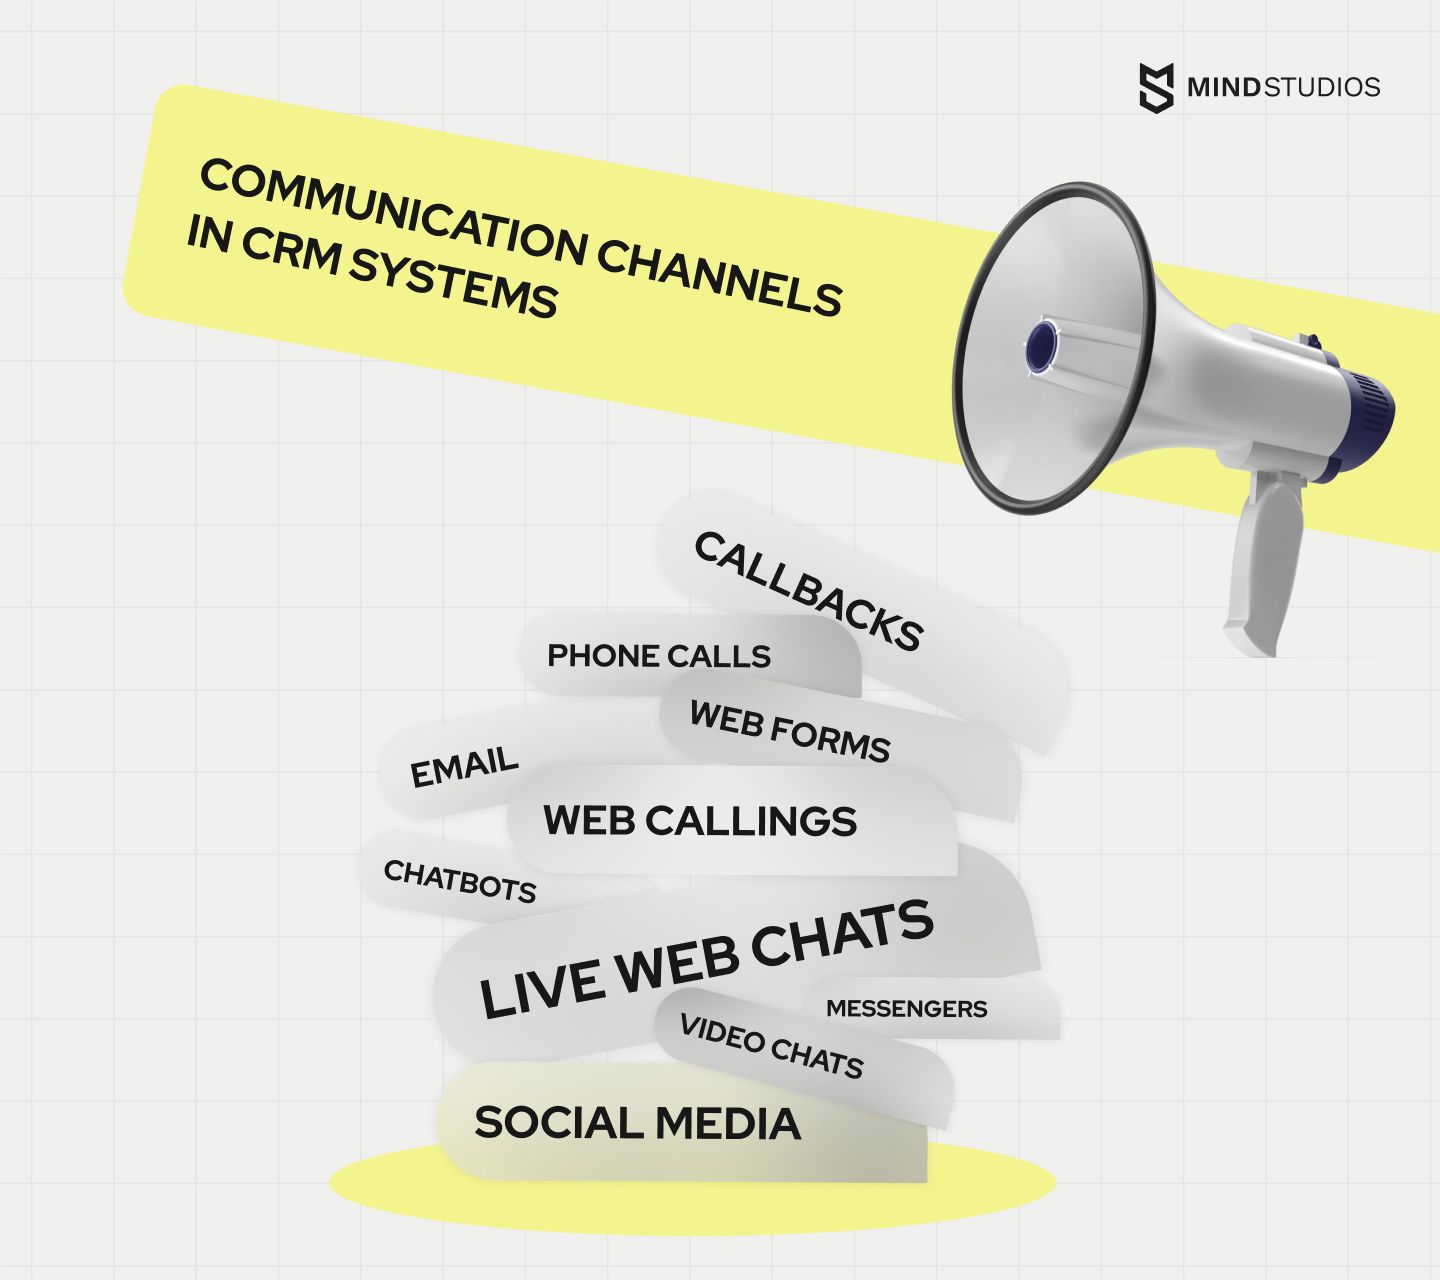 Communication channels in CRM systems